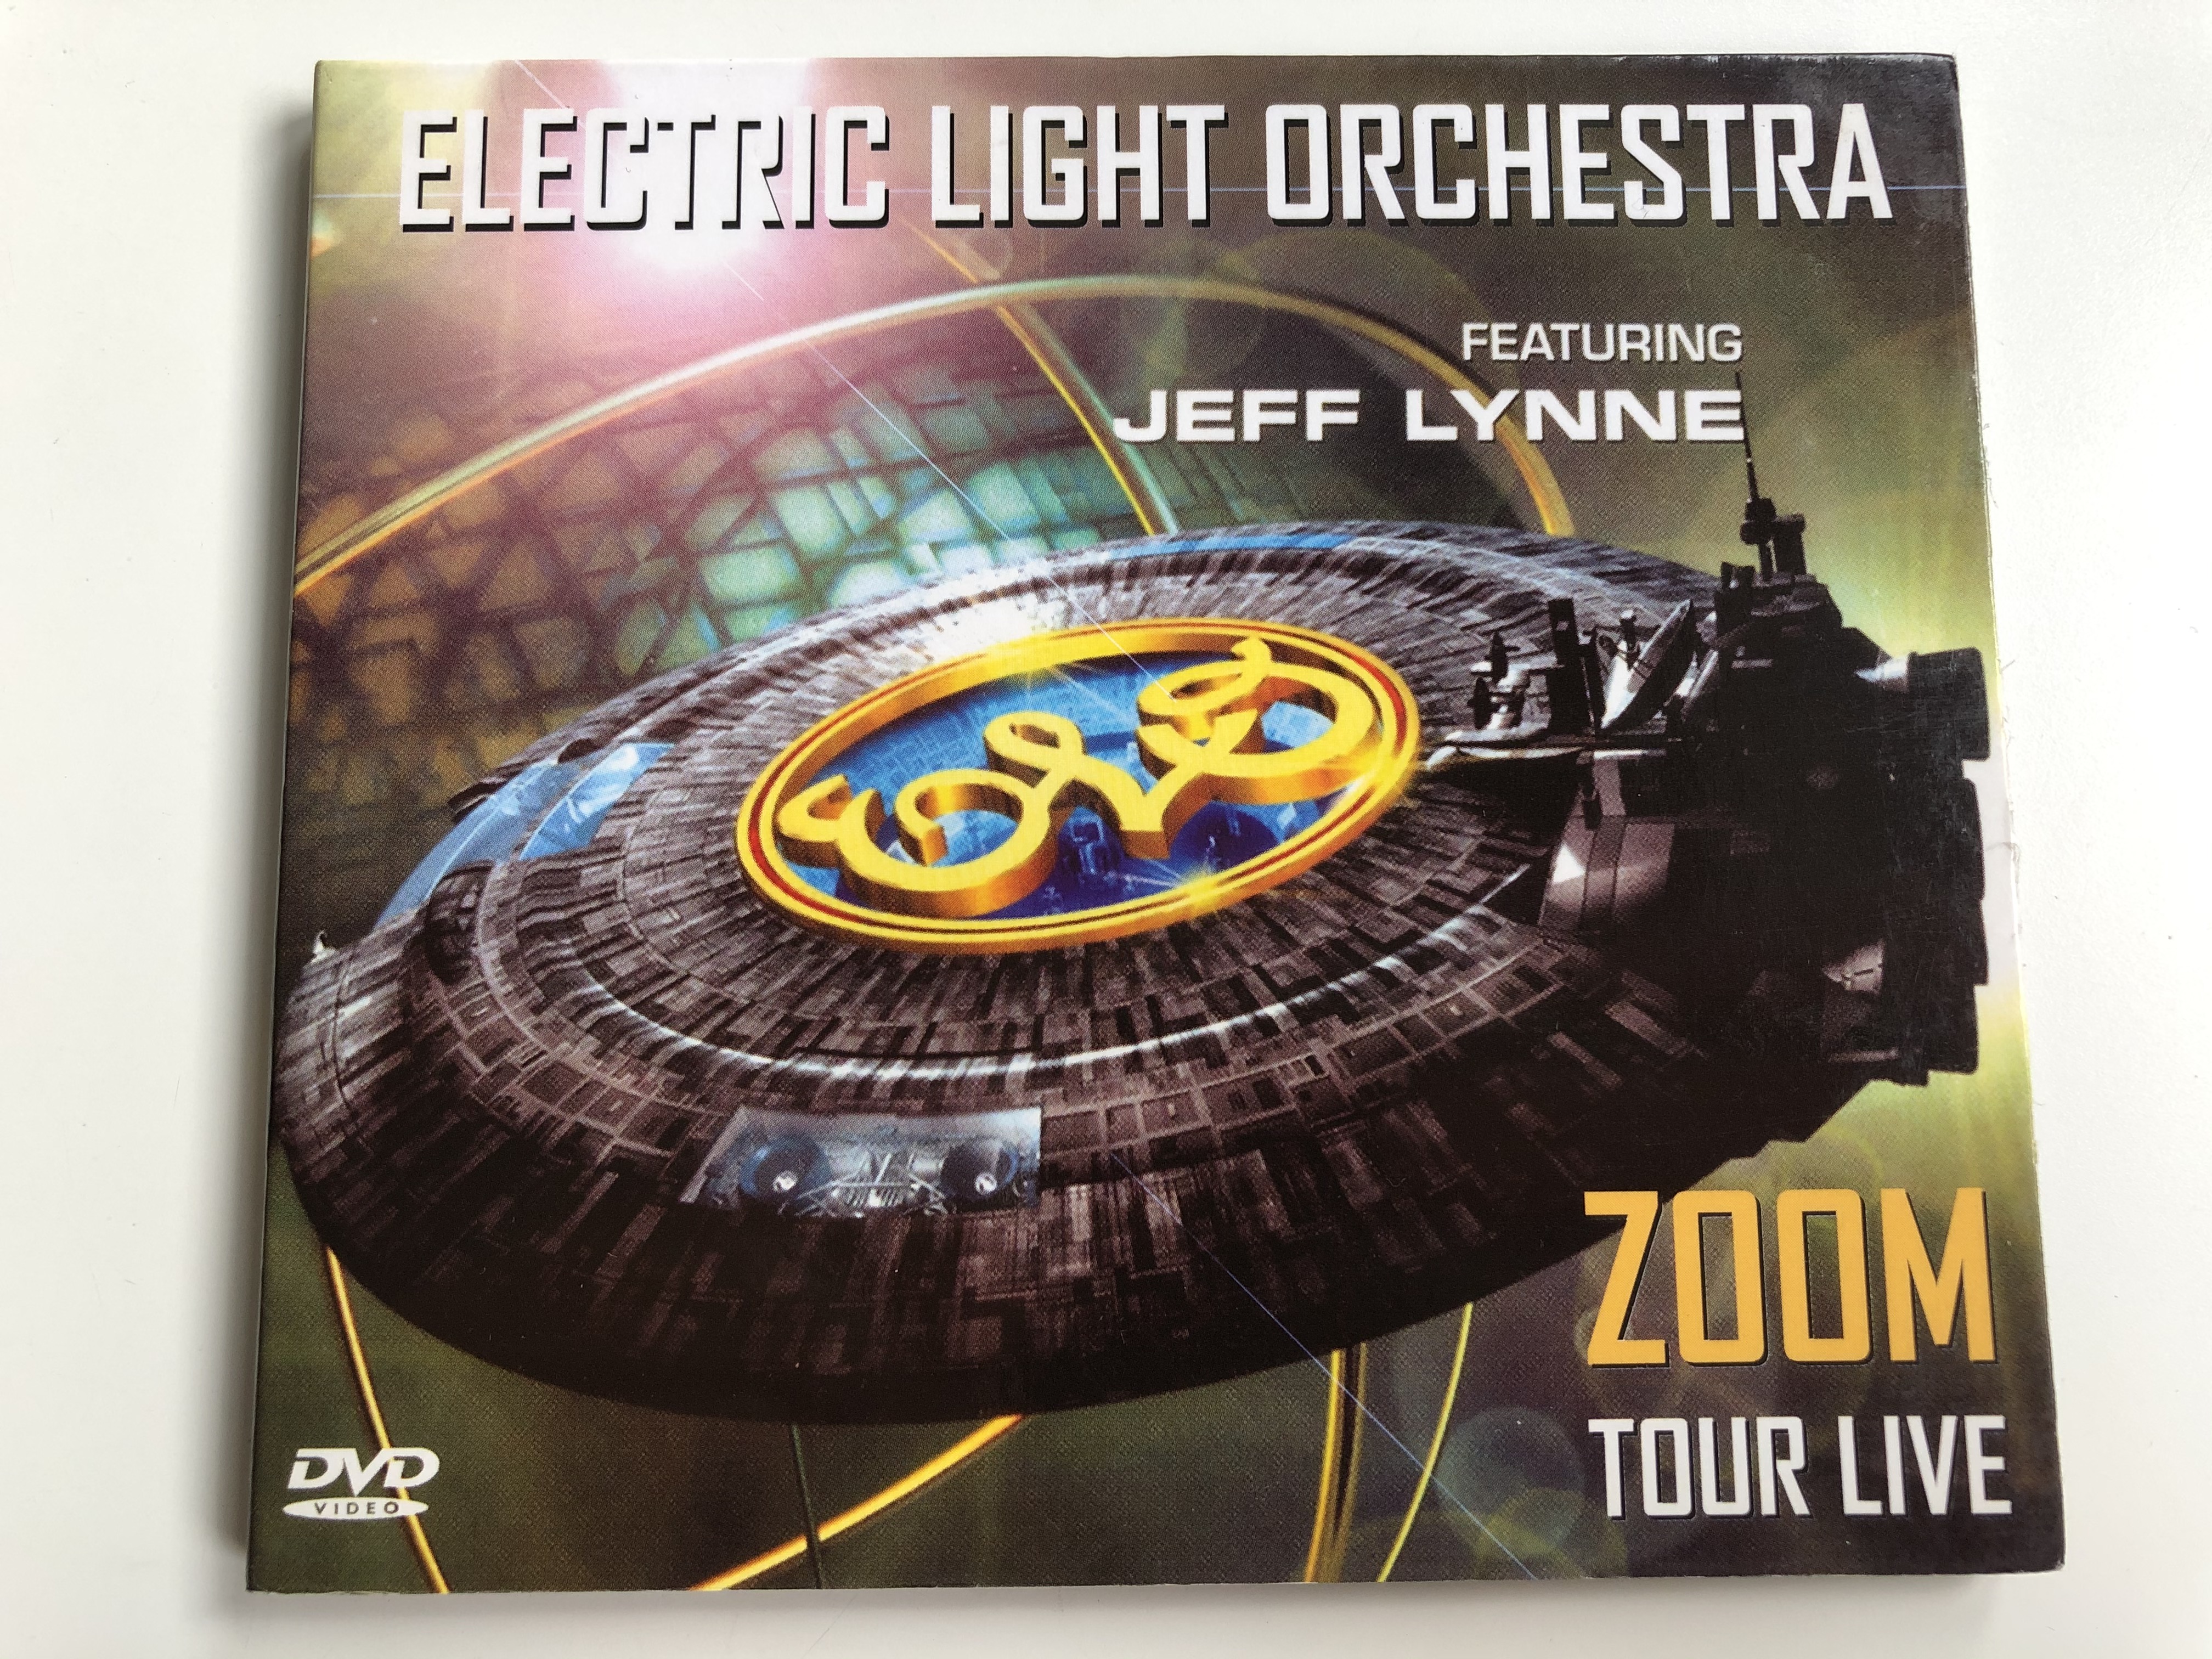 Electric Light Orchestra ft. Jeff Lynne - Zoom tour live DVD 2007 Bonus -  Video interwiew with Jeff Lynne / Evil Woman, Telephone Line, Tightrope,  Shine a Little Love - bibleinmylanguage